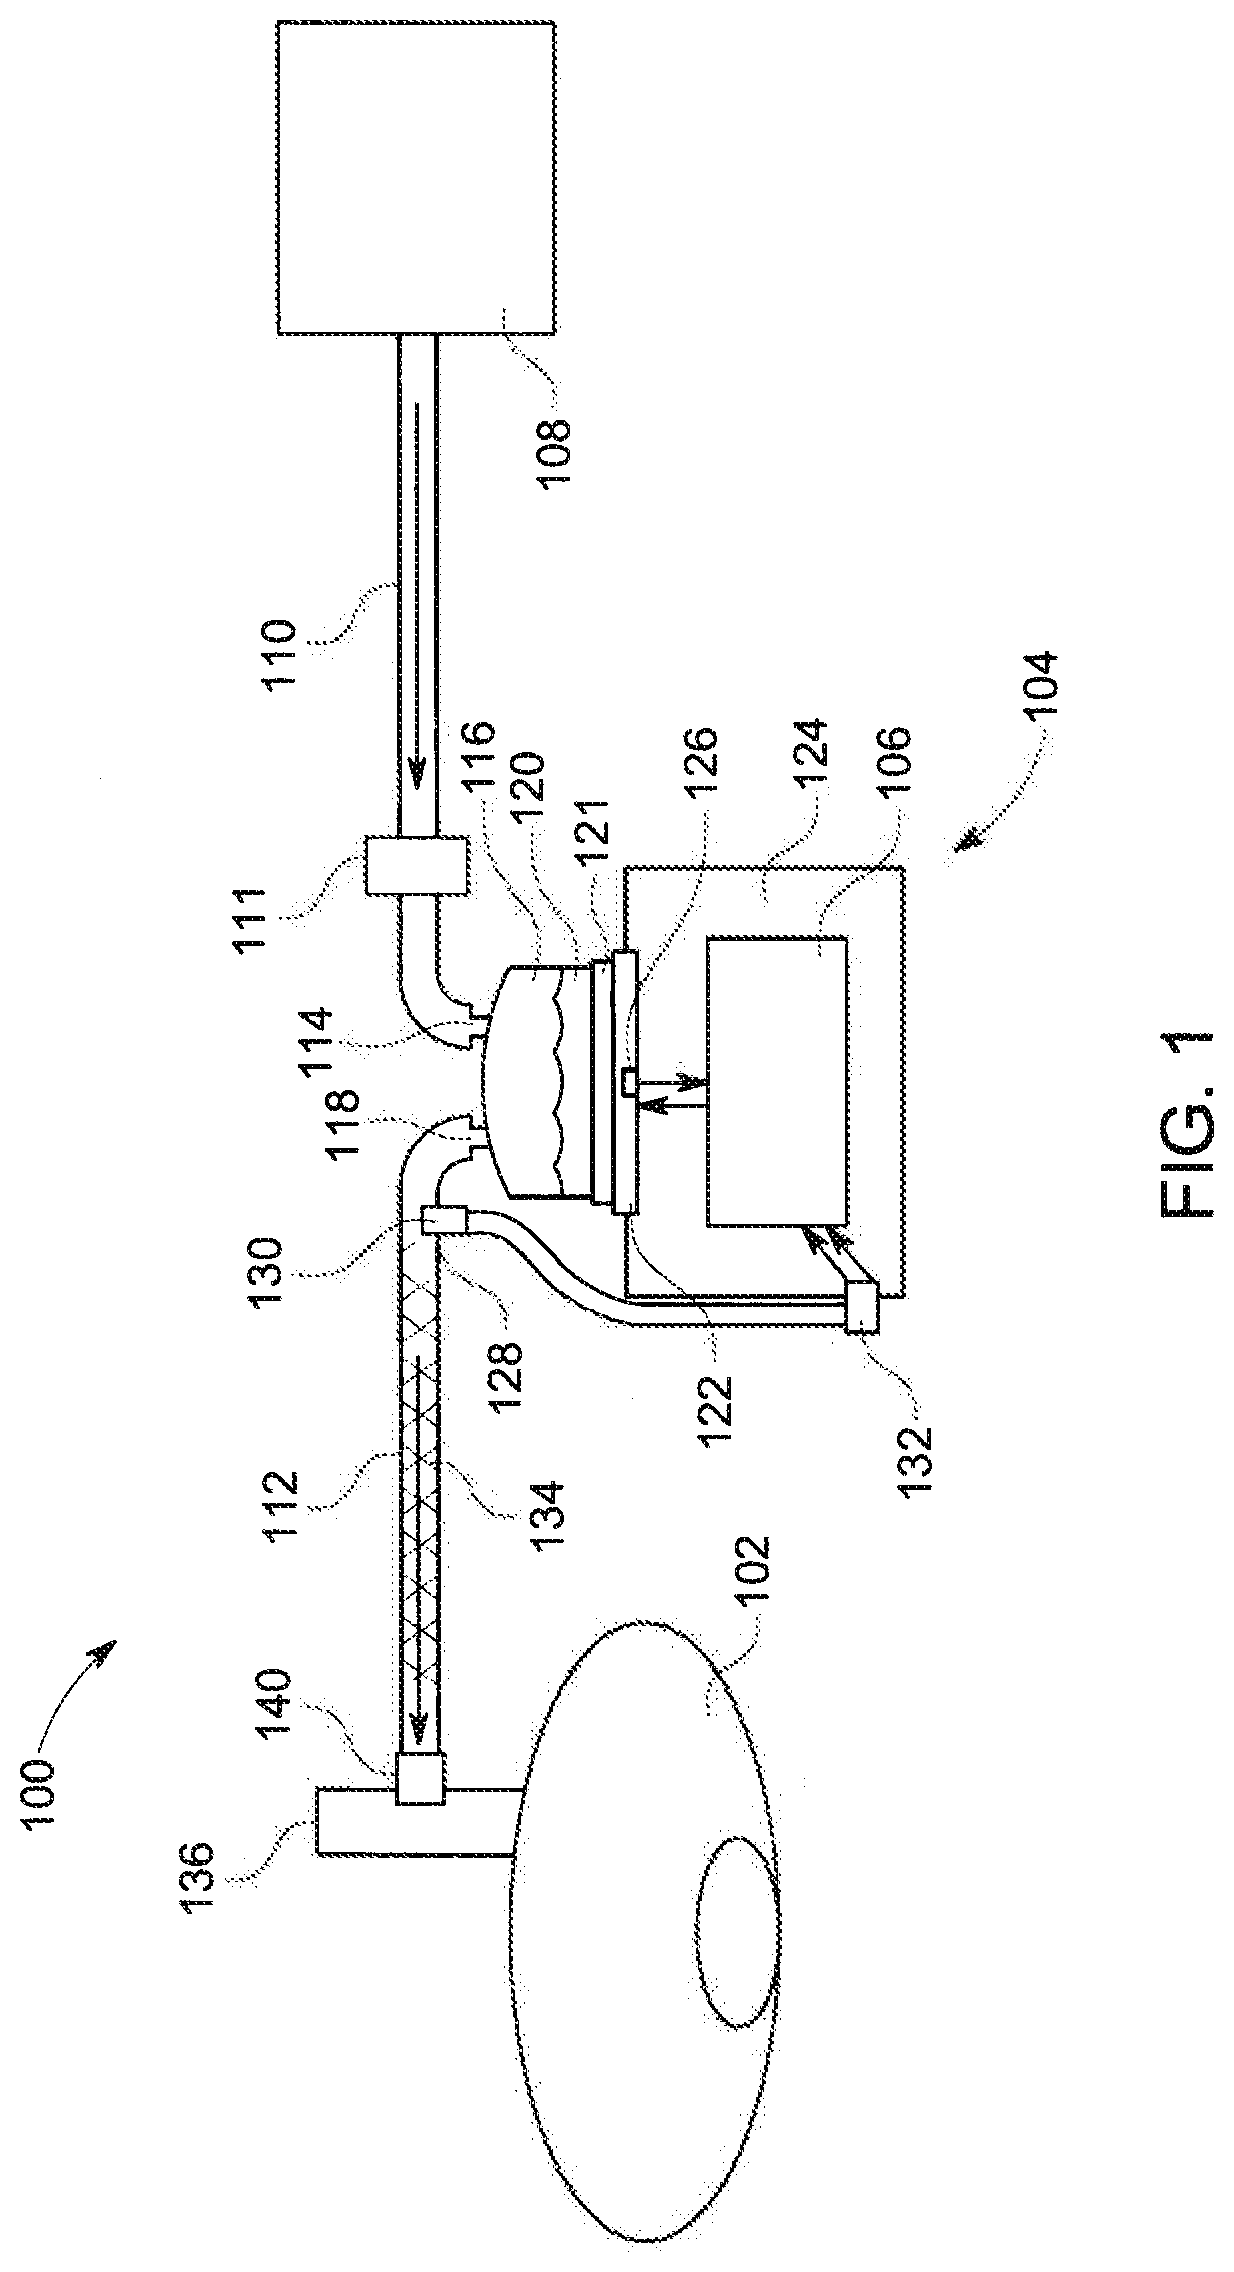 Humidification chamber and apparatus and systems including or configured to include said chamber